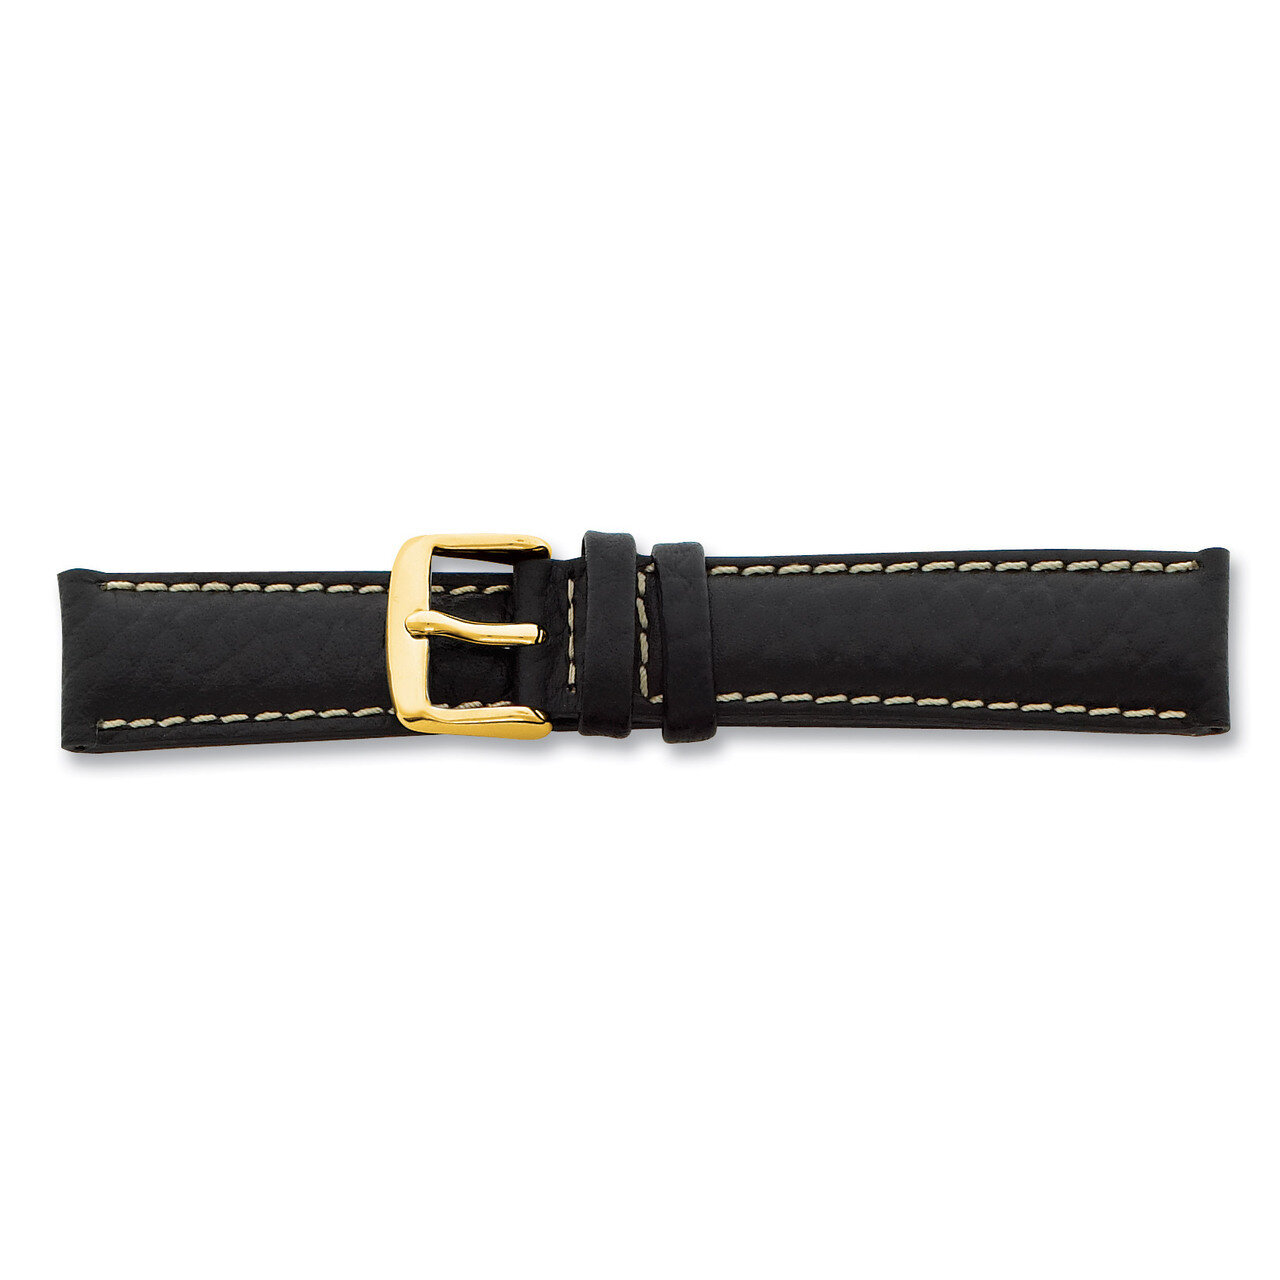 28mm Black Leather White Stitch Buckle Watch Band 7.5 Inch Gold-tone BAY99-28